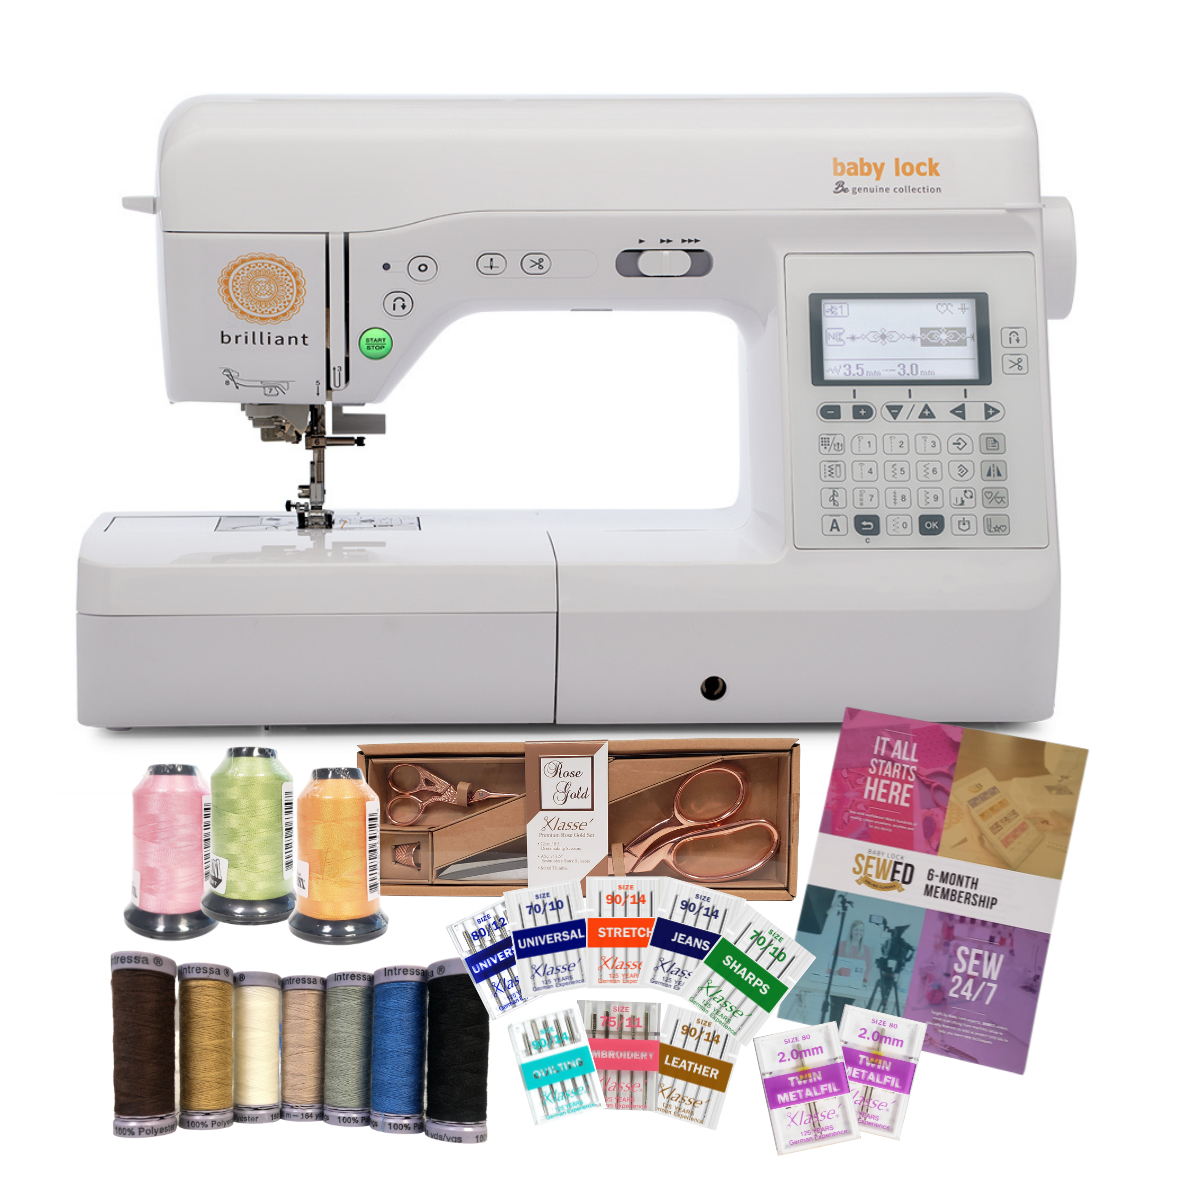 Baby Lock Brilliant Featurerich Sewing and Quilting Machine